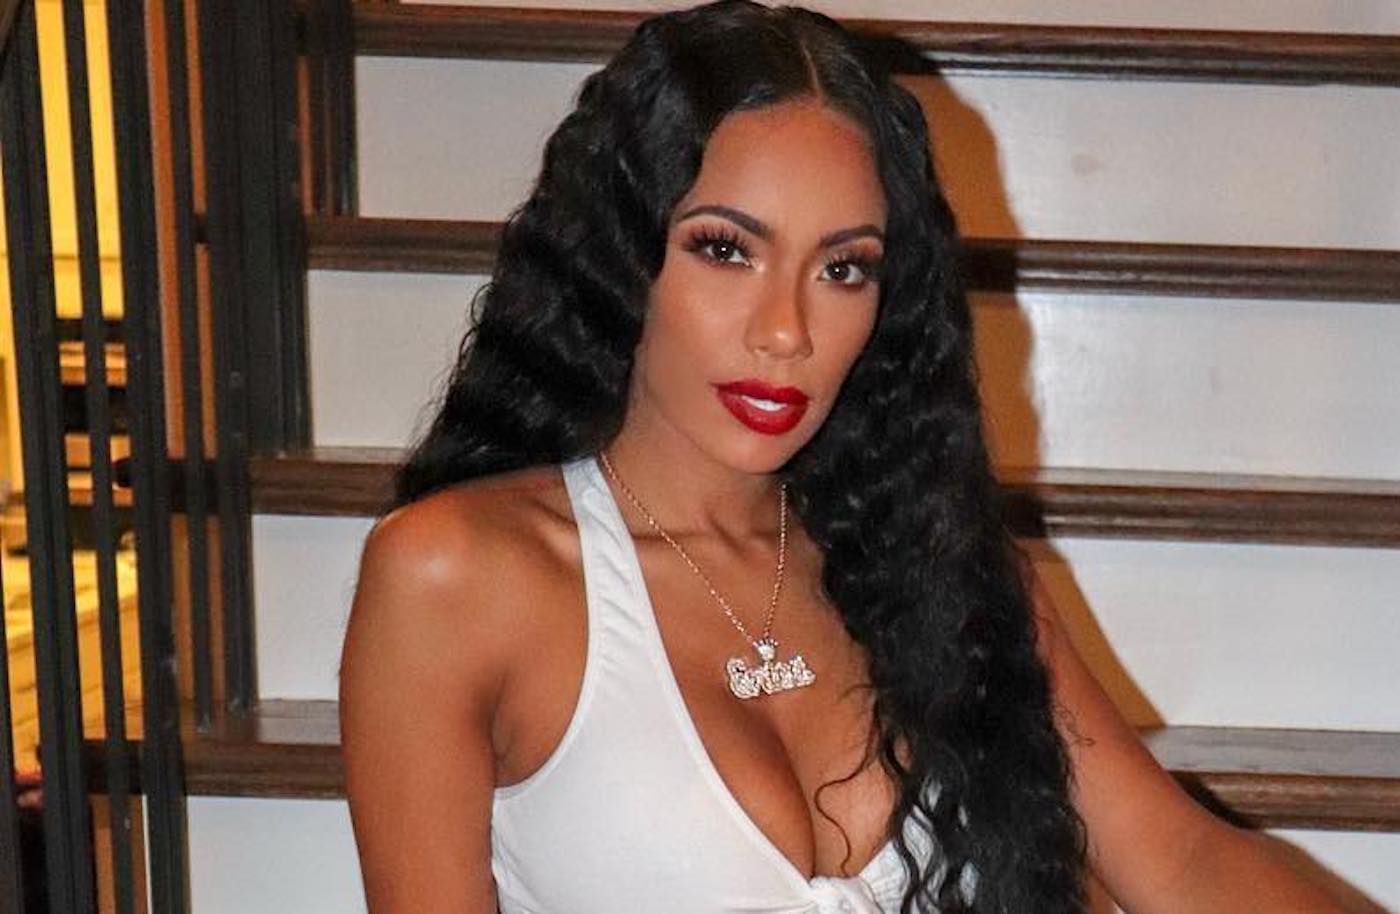 Erica Mena Shows Off A Bomb Outfit From SheIn And Fans Are Here For It